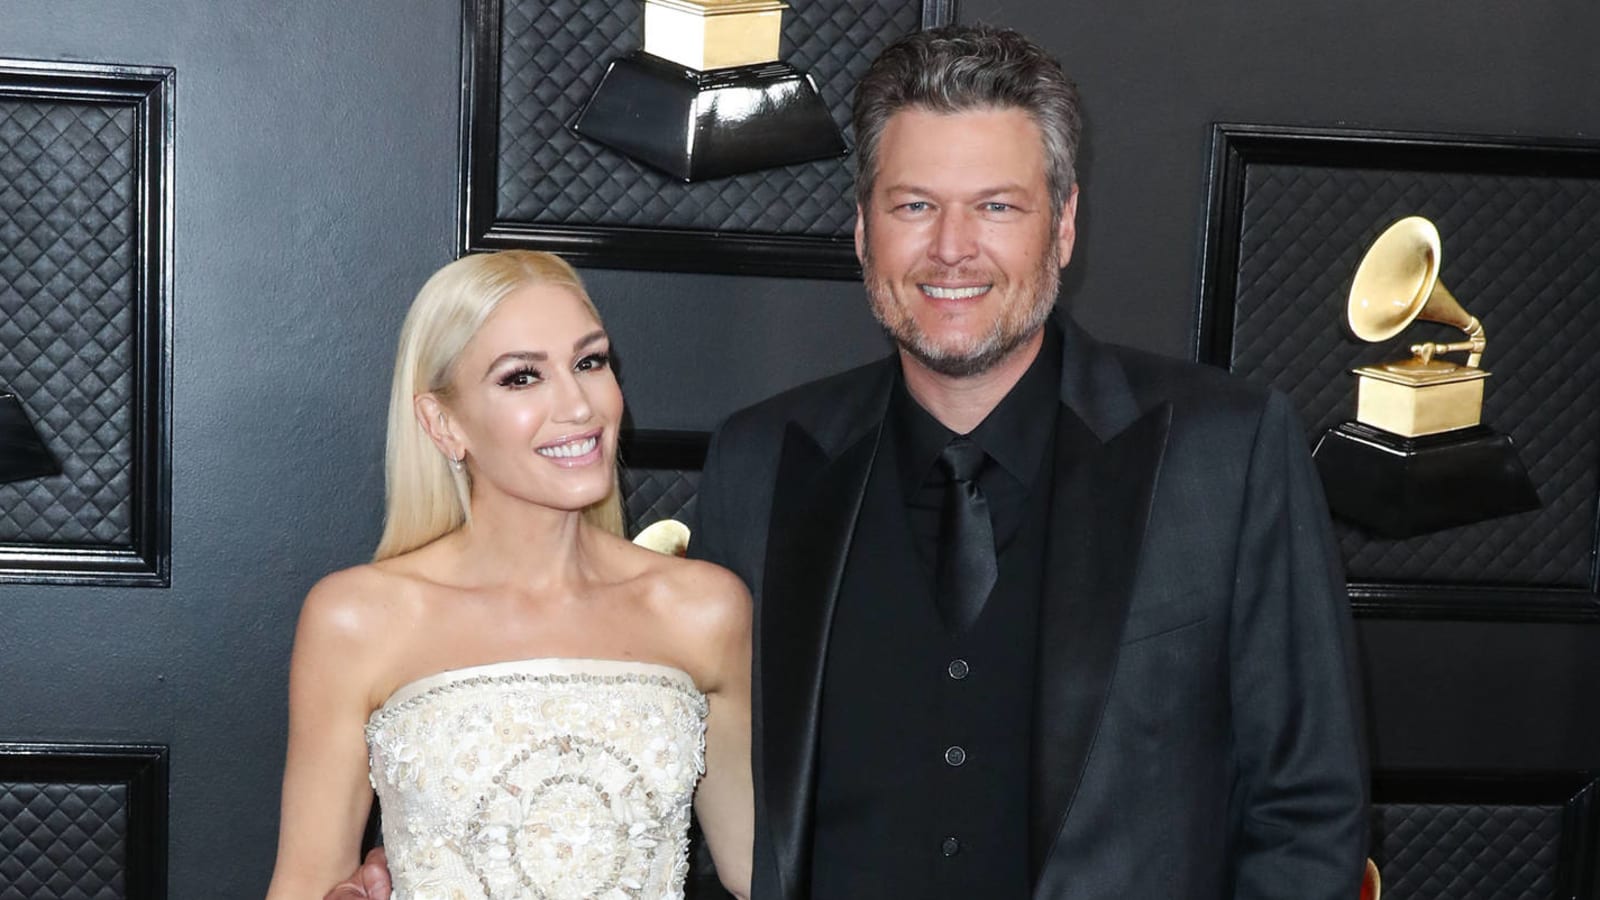 Blake Shelton jokes about his and Gwen Stefani's first dance song at their wedding